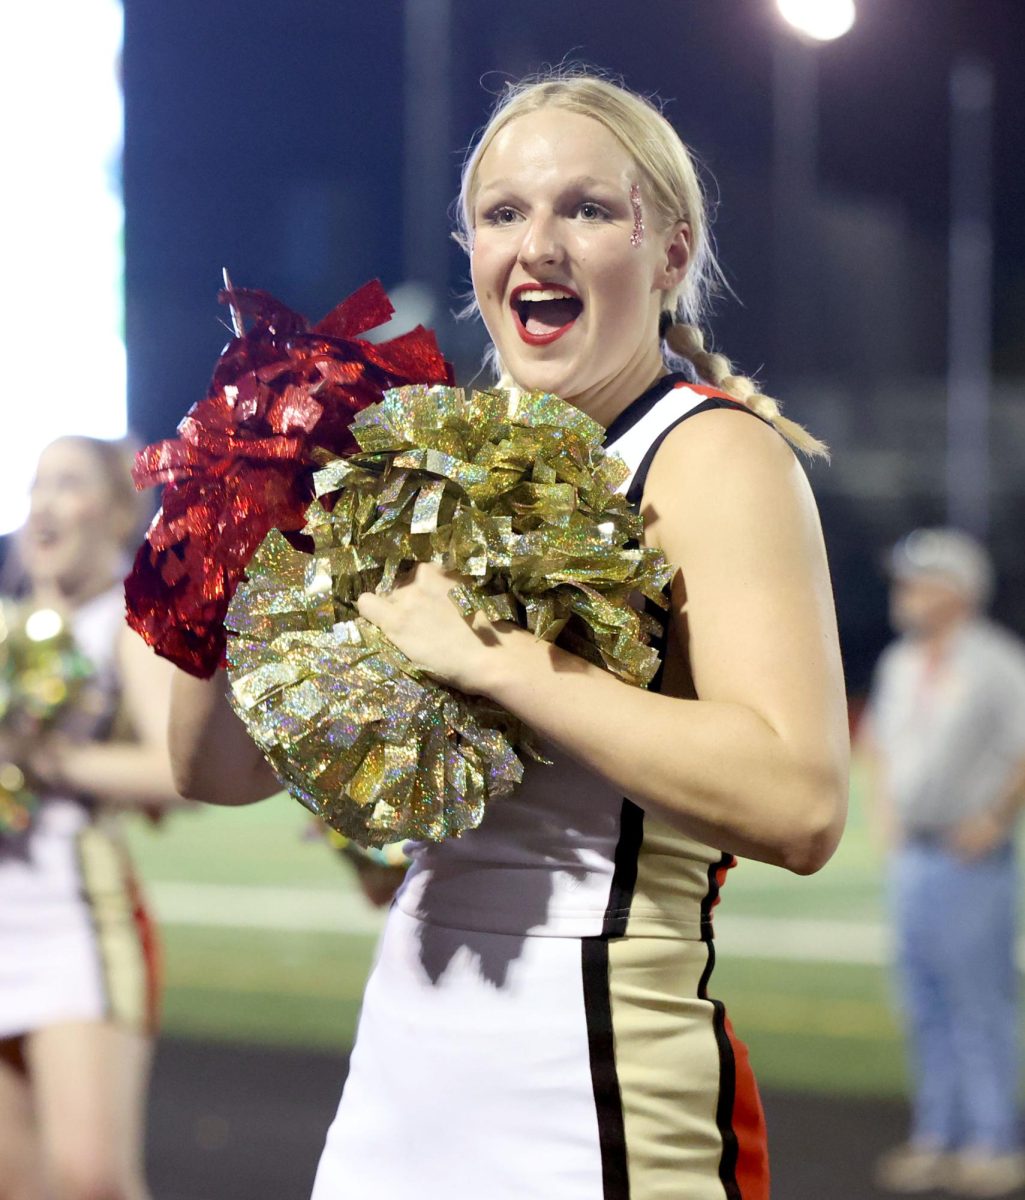 Senior Kaylee Davis cheers on during the football game against Galena Park on Friday, Sep. 1, 2023. The Football team brought home a win of 27-7 and the cheer team hyped them up the whole game. “We were very excited and very proud of our boys and our team for coming together to win,” Davis said. “Whenever we got the first touchdown of the game everyone on the cheer team was so excited and it brought the team closer.”

